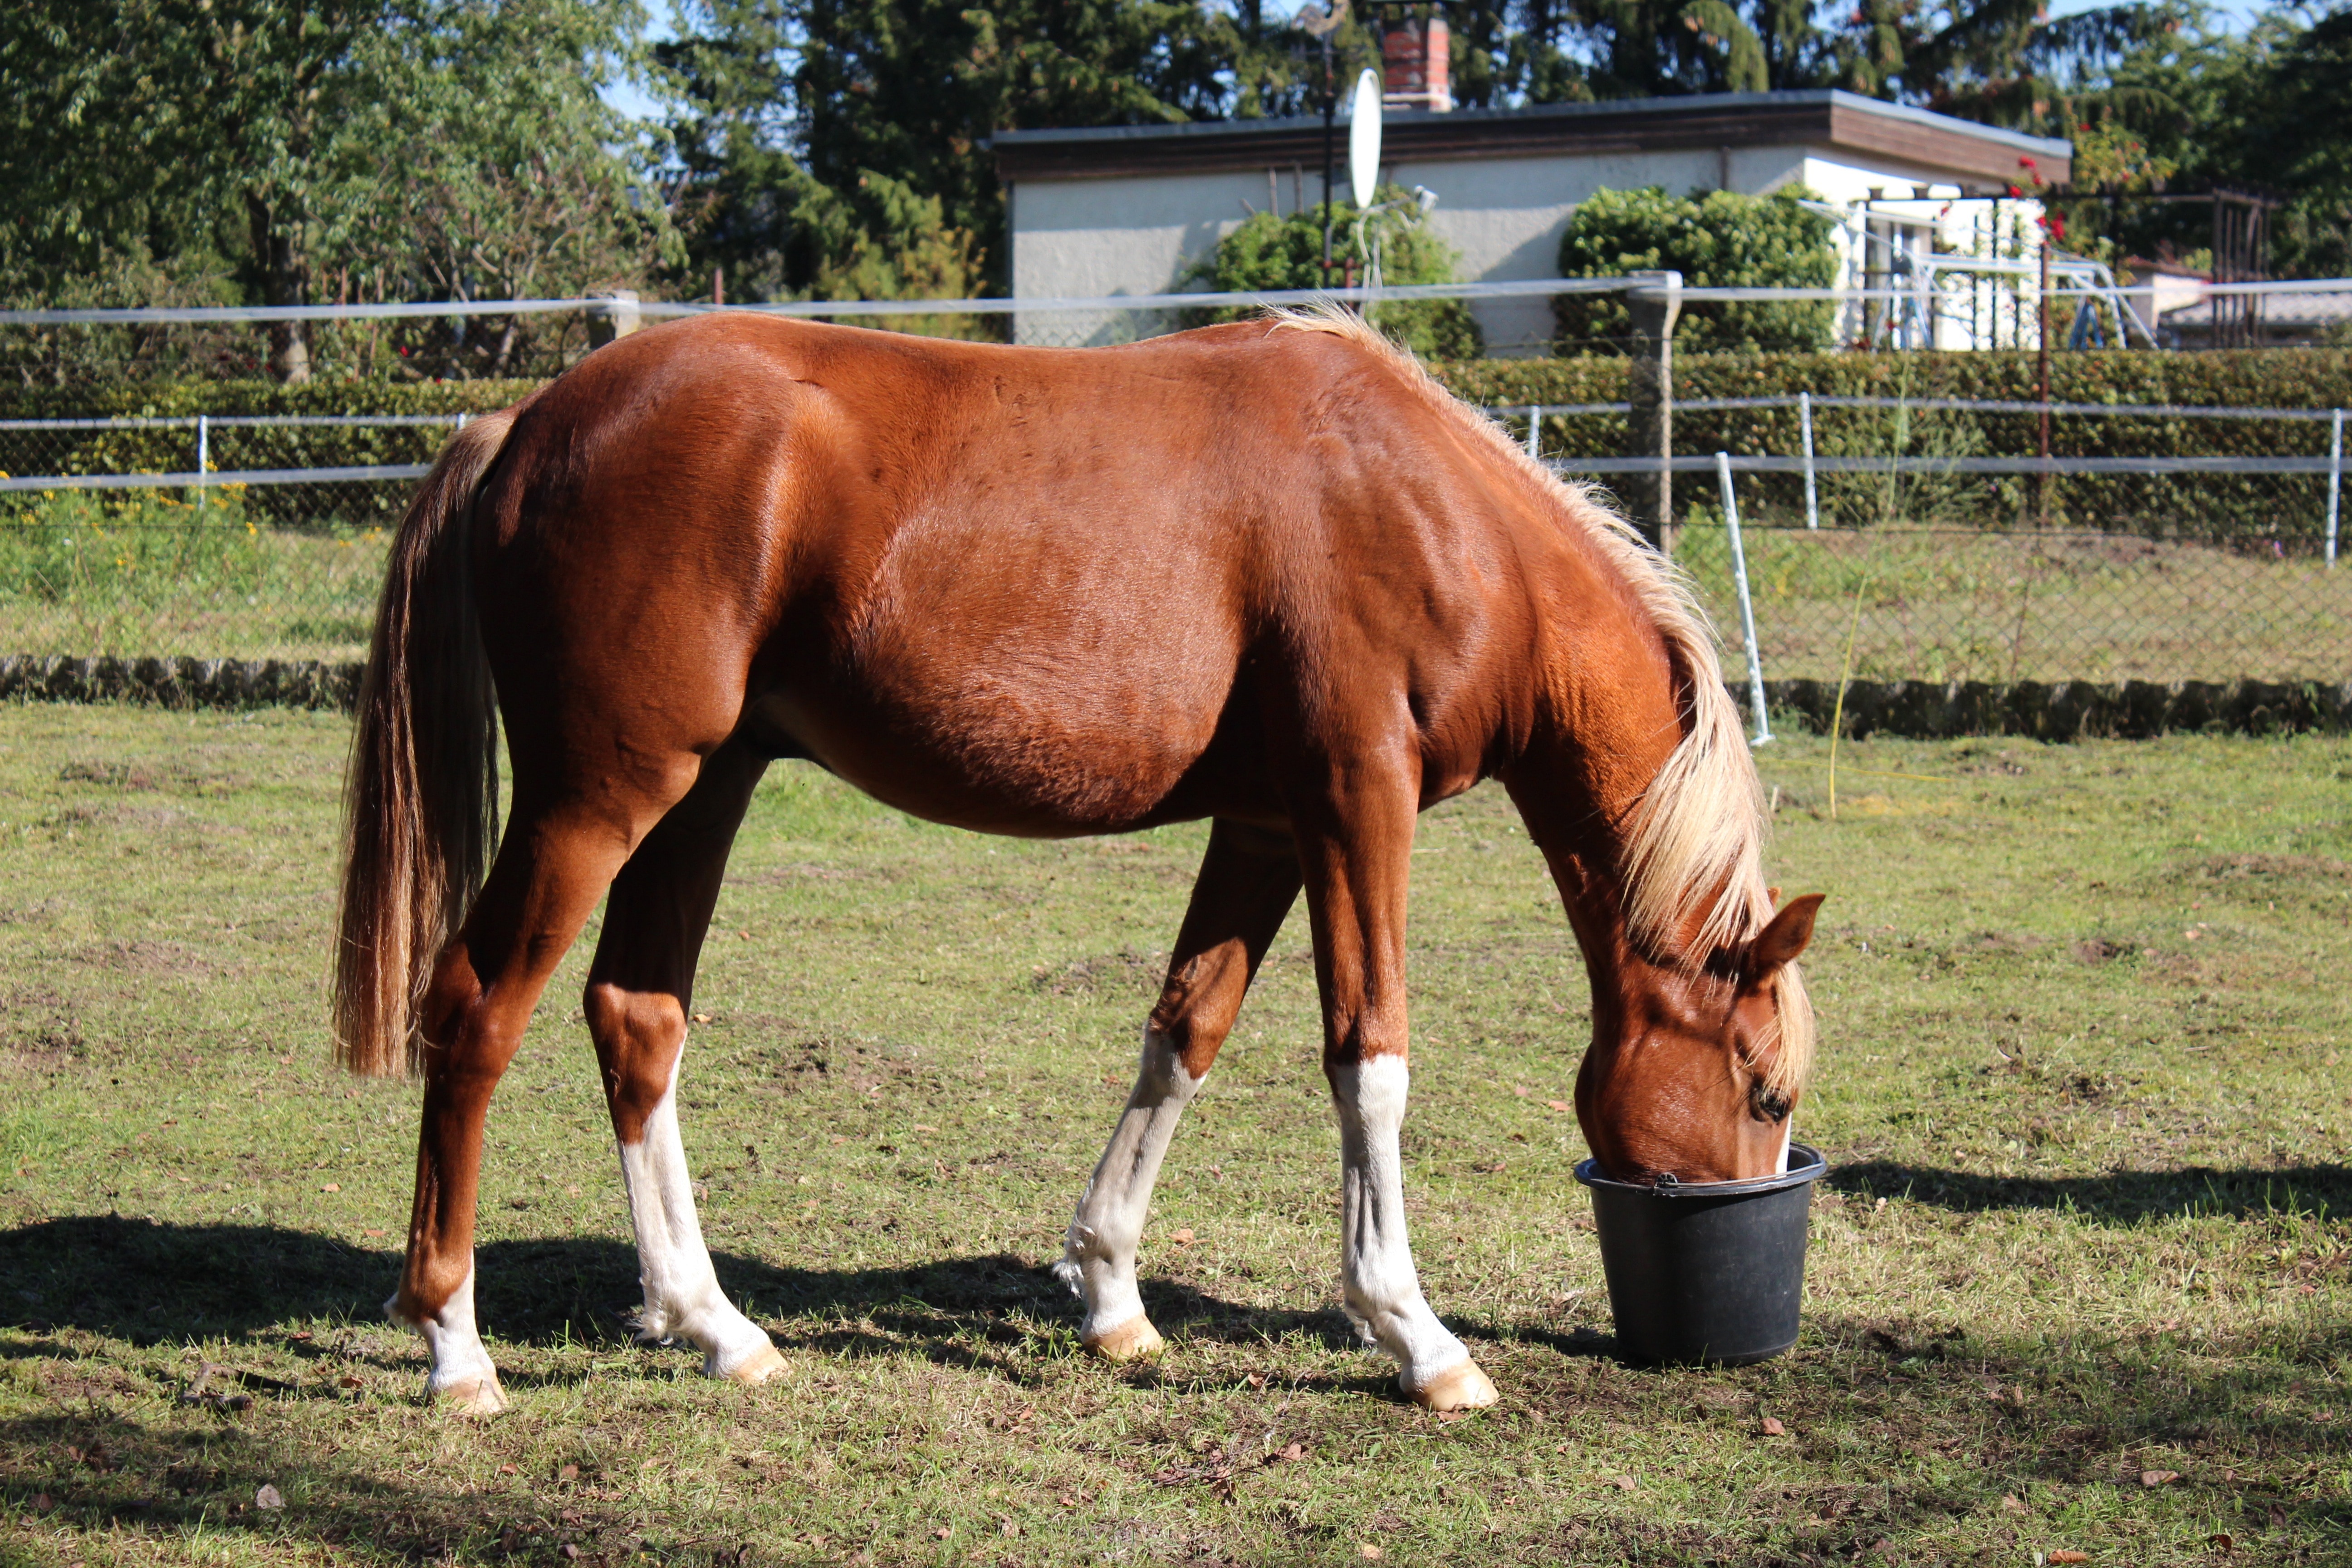 horse drinking on pail during daytime